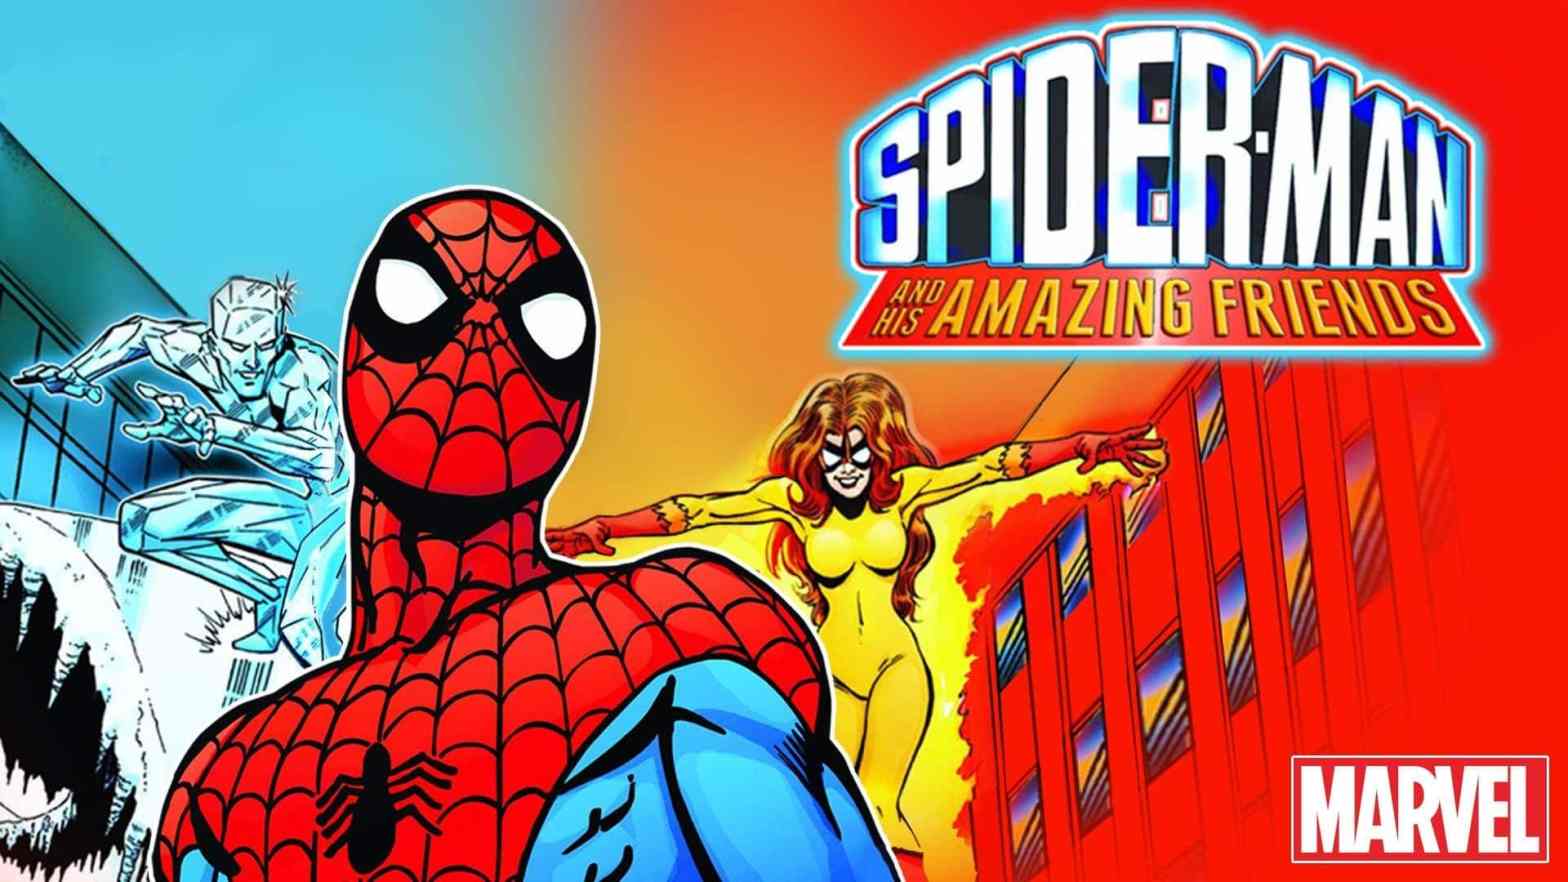 Marvel Spider-man - Spidey and His Amazing Friends - High and